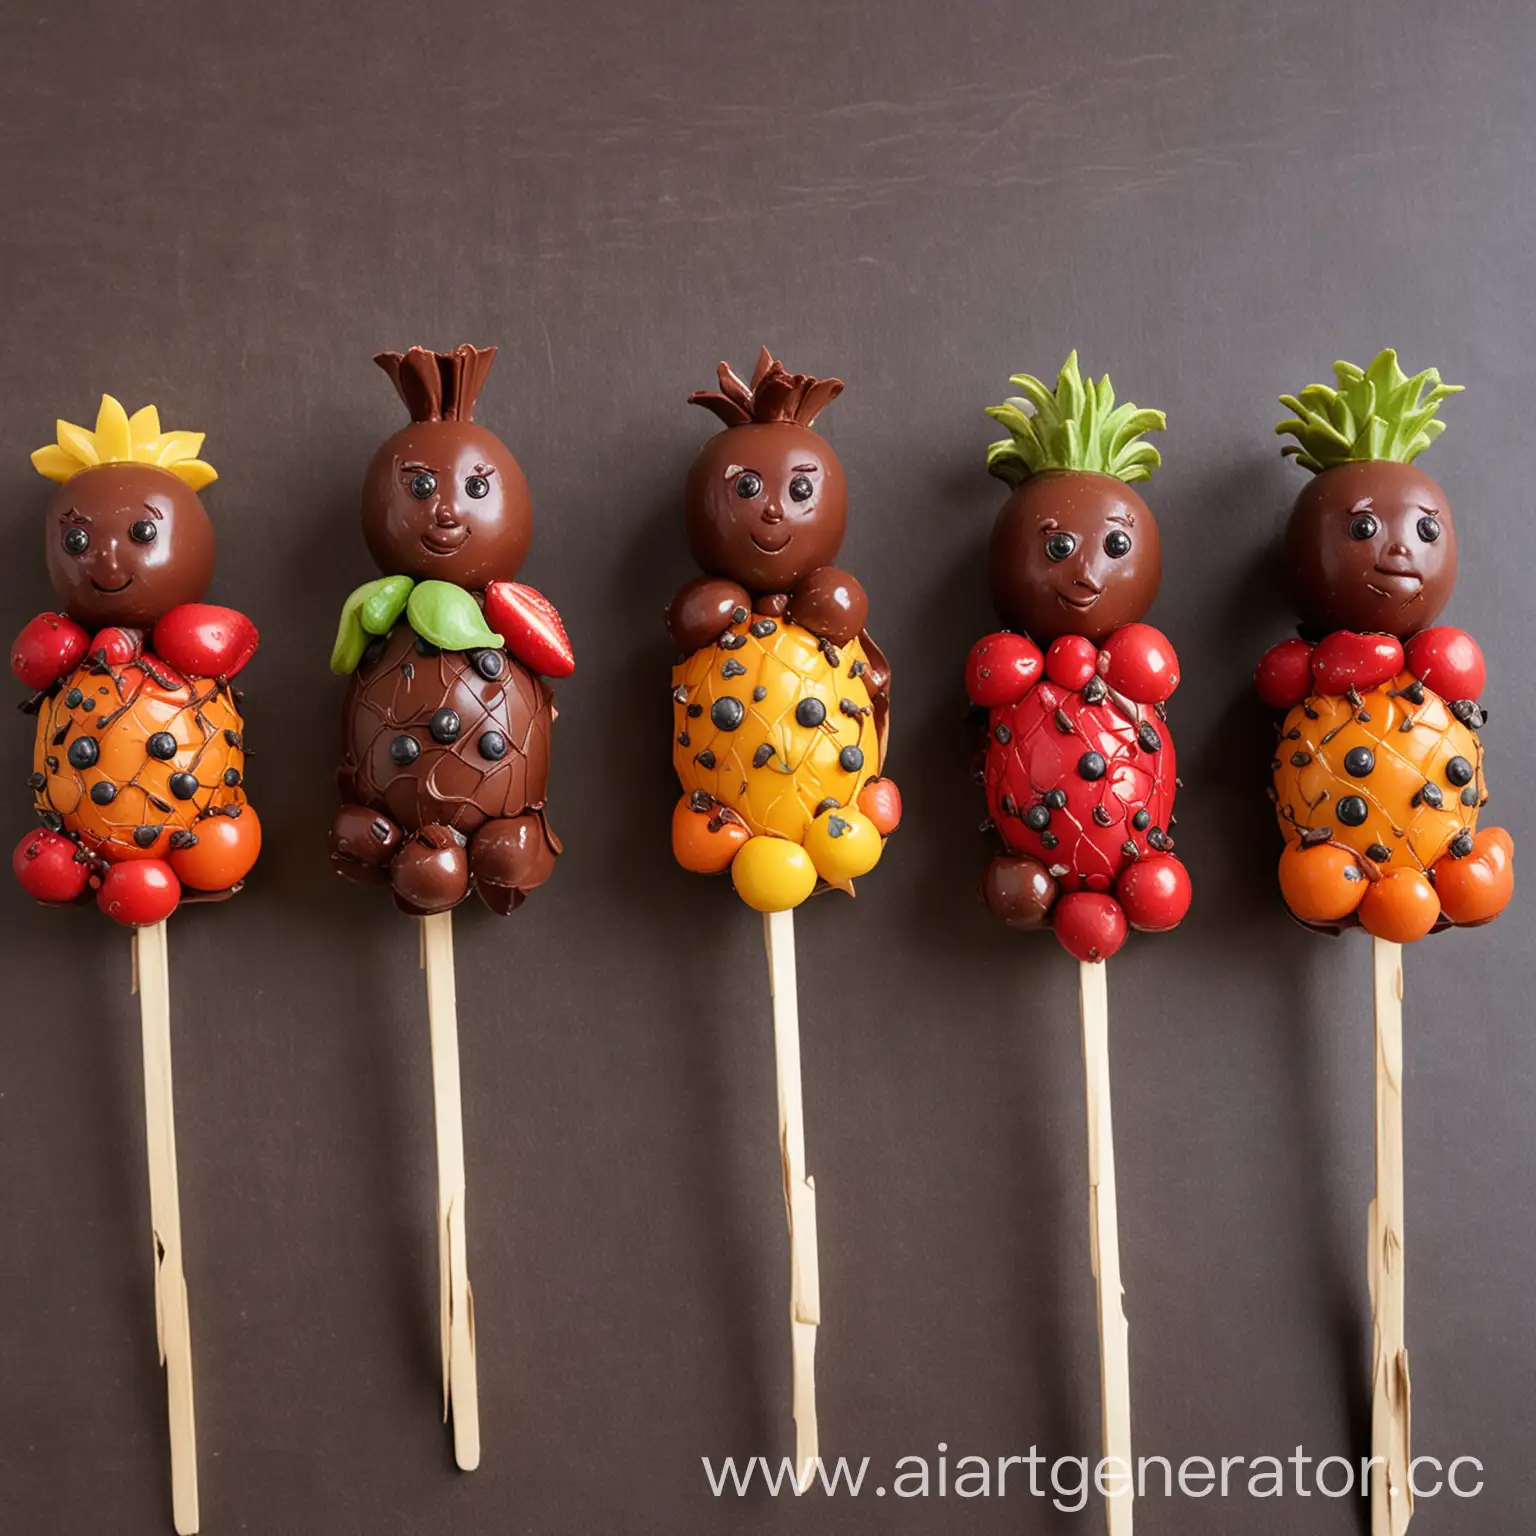 ChocolateCoated-Fruit-Figurines-on-Sticks-Delicious-and-Artistic-Treats